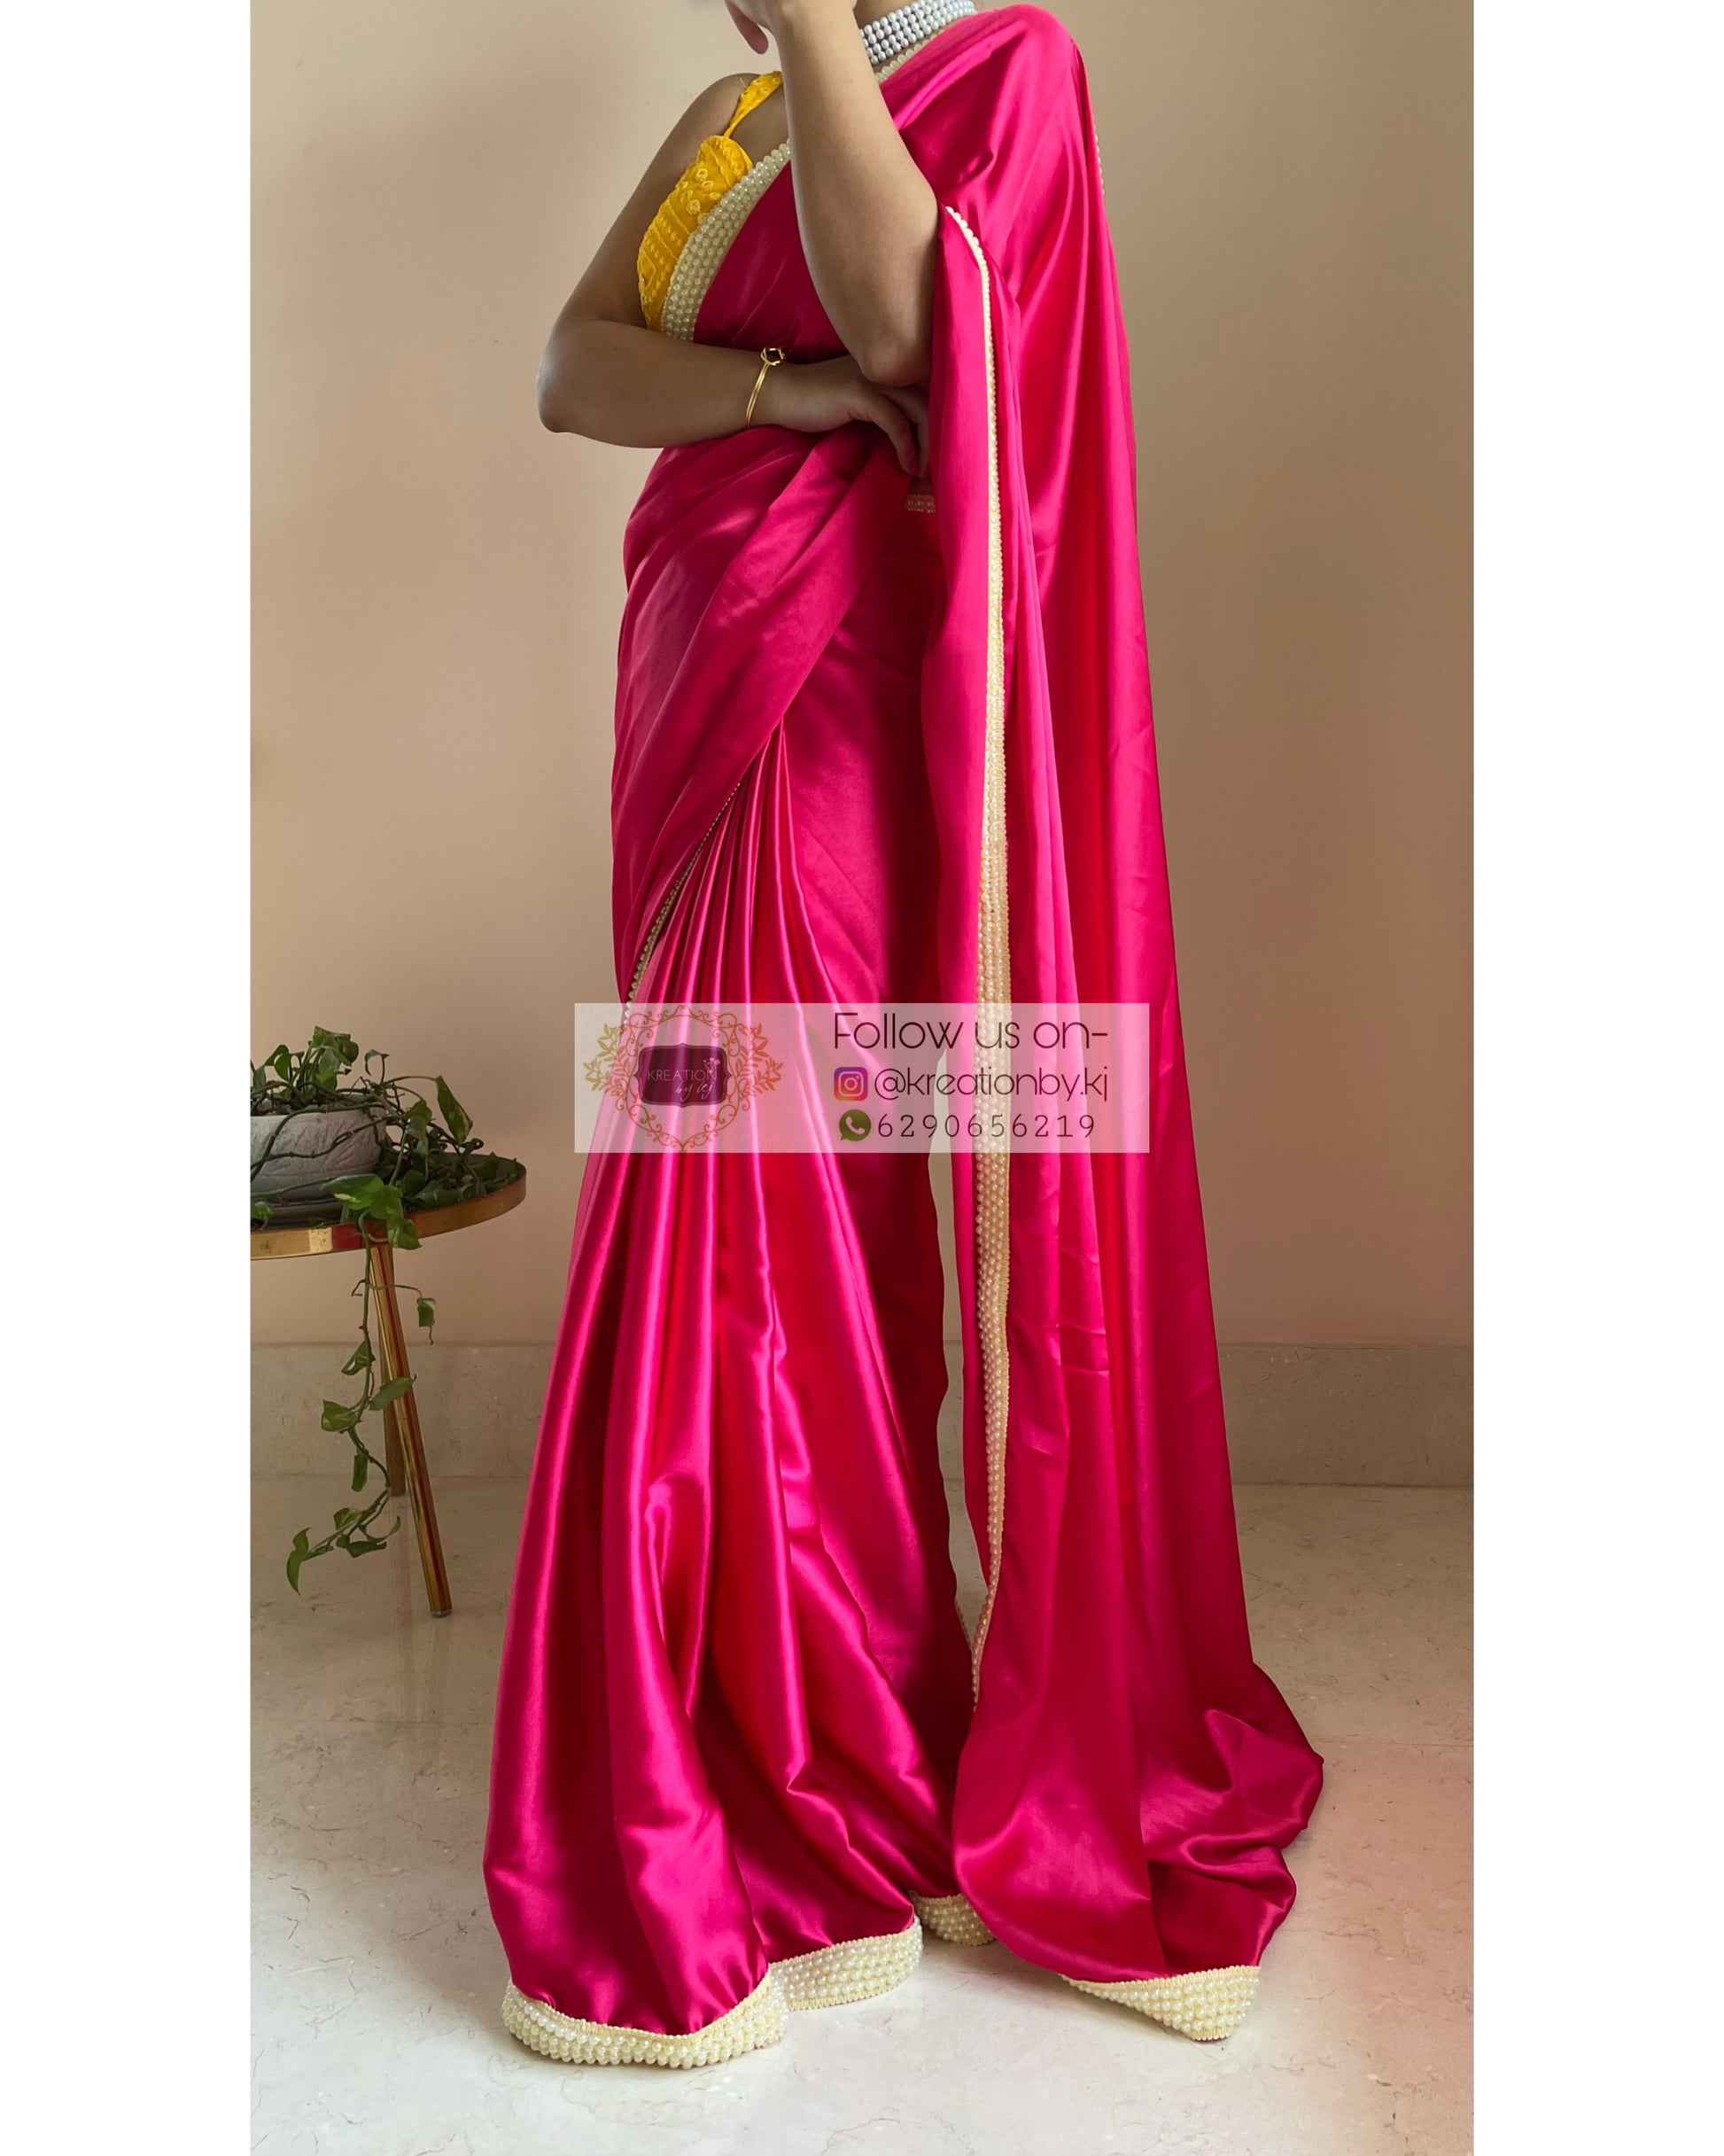 Hot Pink Mother of Pearl Saree - kreationbykj